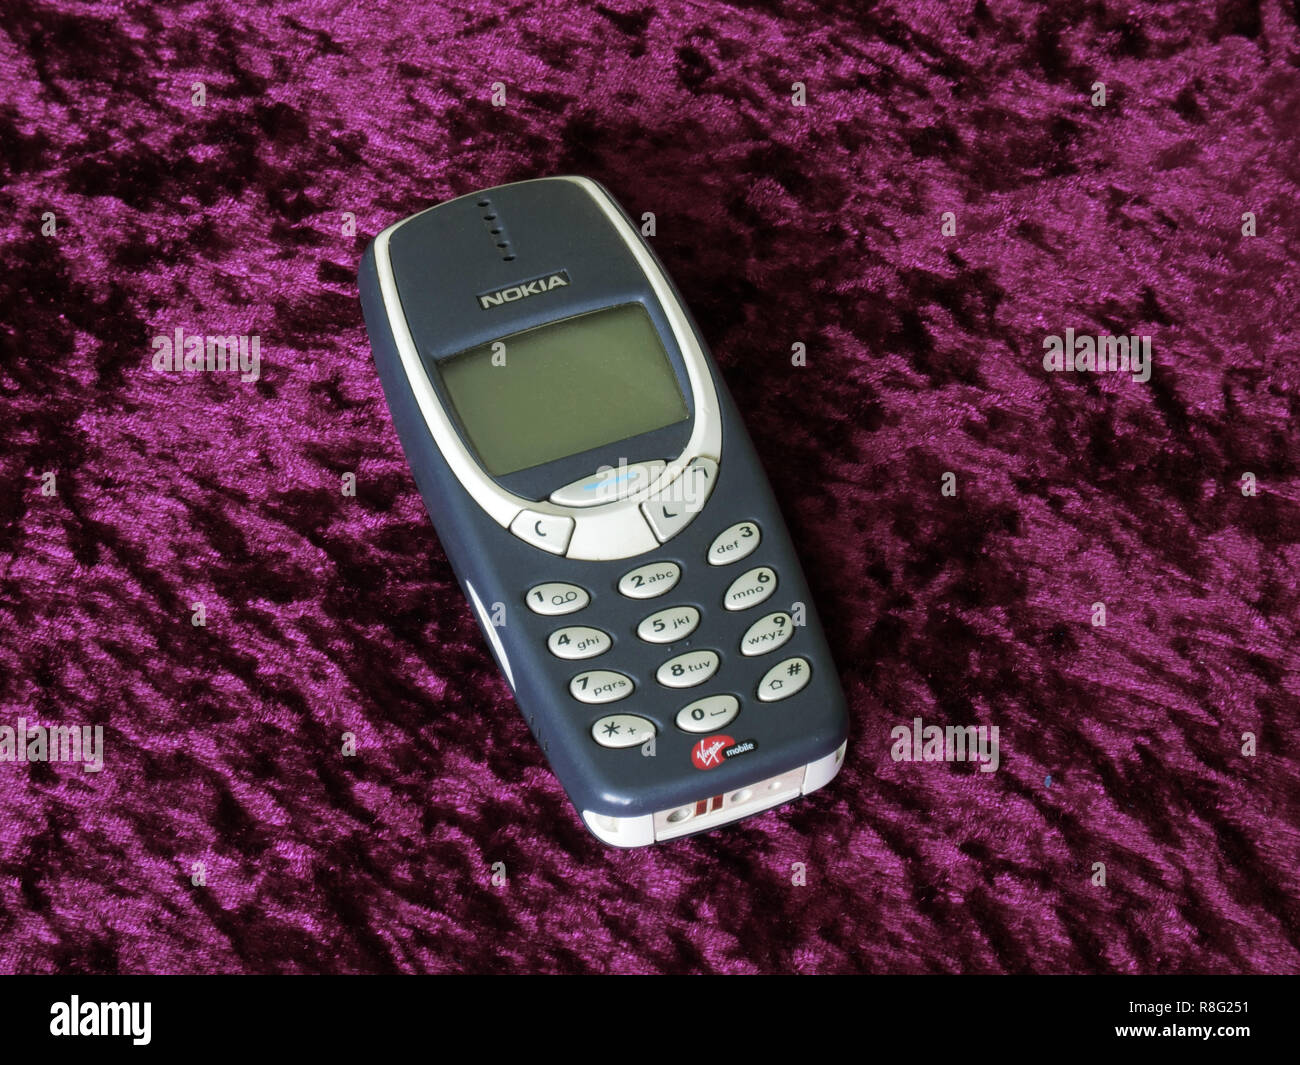 Nokia 3310 Mobile Phone or Cellphone with Virgin Mobile Pay as You Go, UK Stock Photo